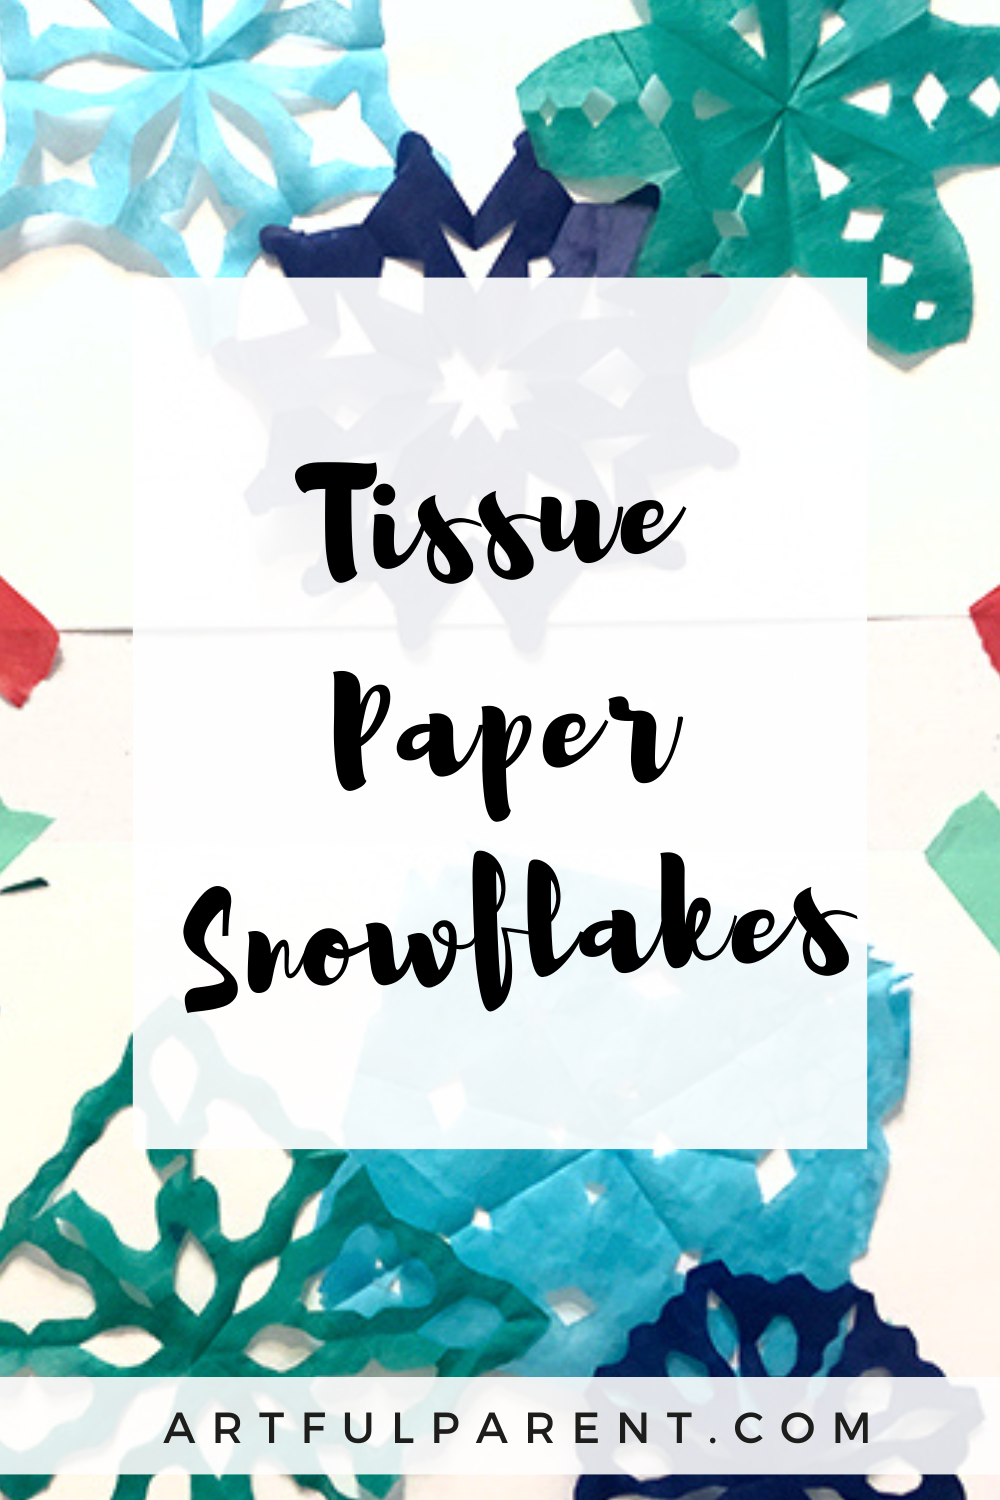 How to Make Tissue Paper Snowflakes